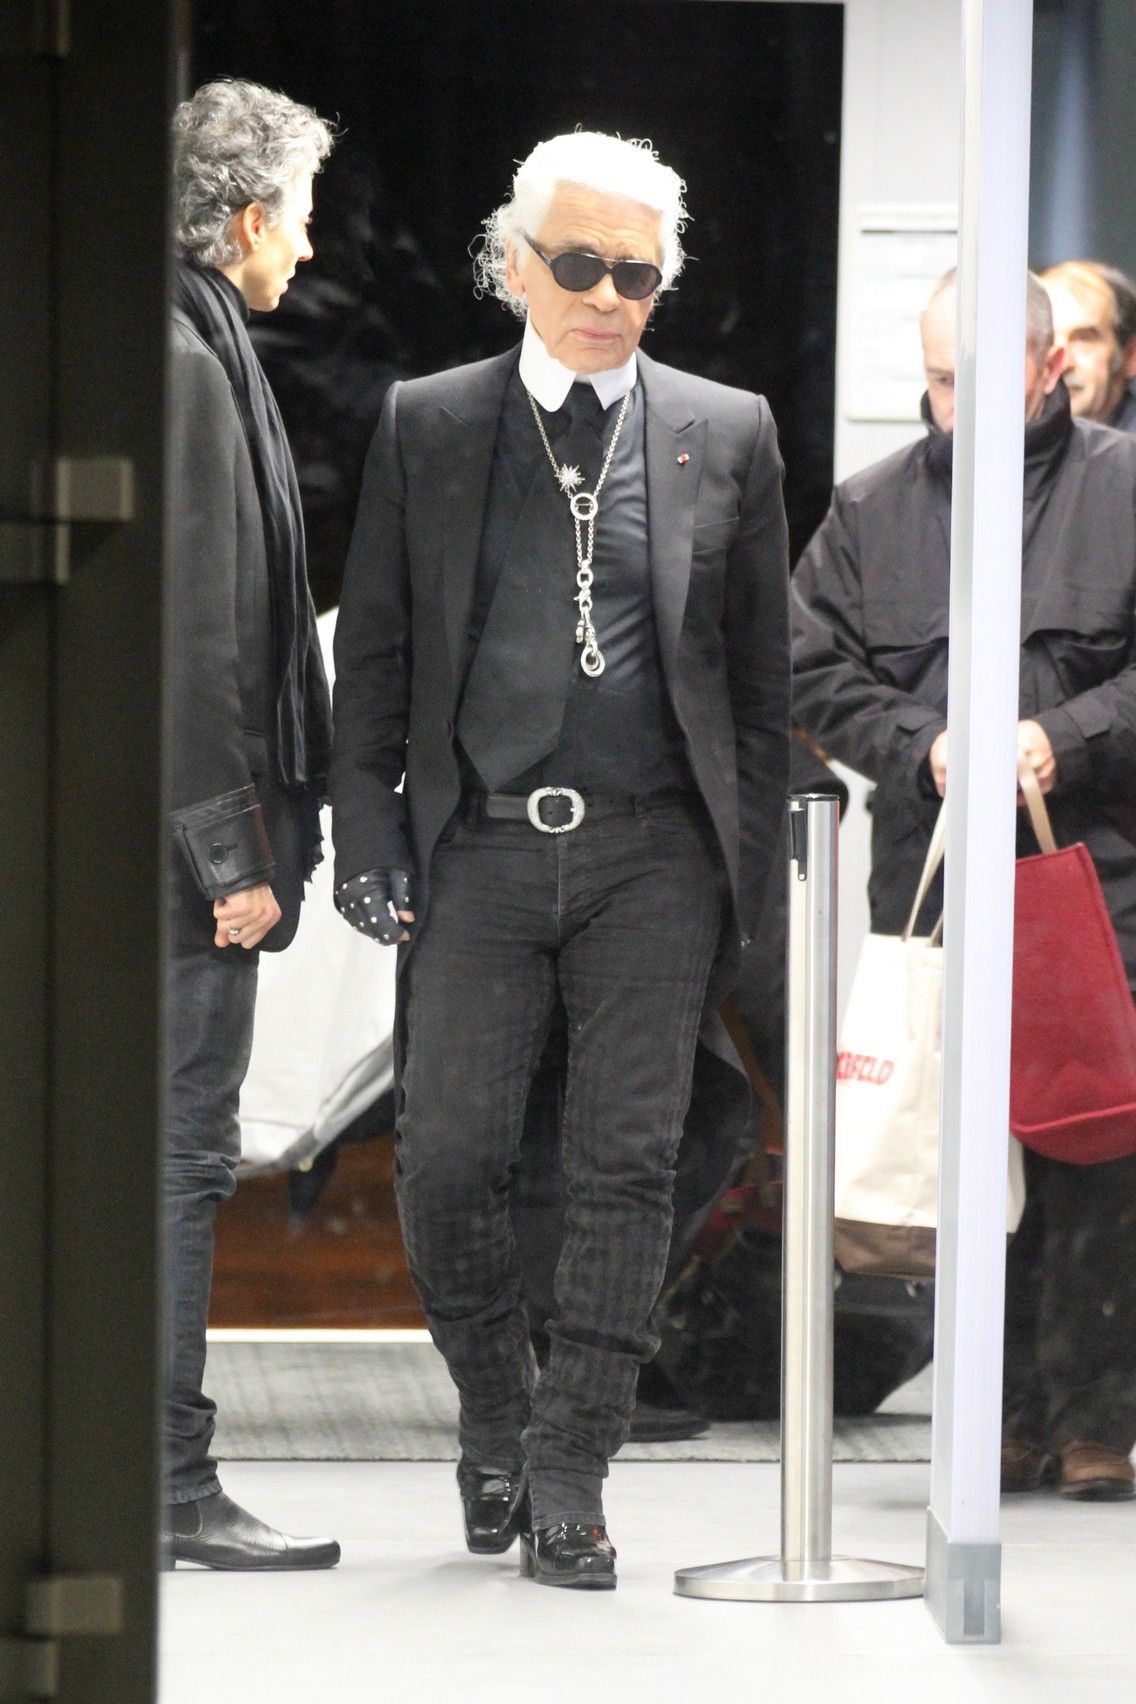 Photos: Karl Lagerfeld wearing Tom Ford during a security check at the airport | Picture 136689